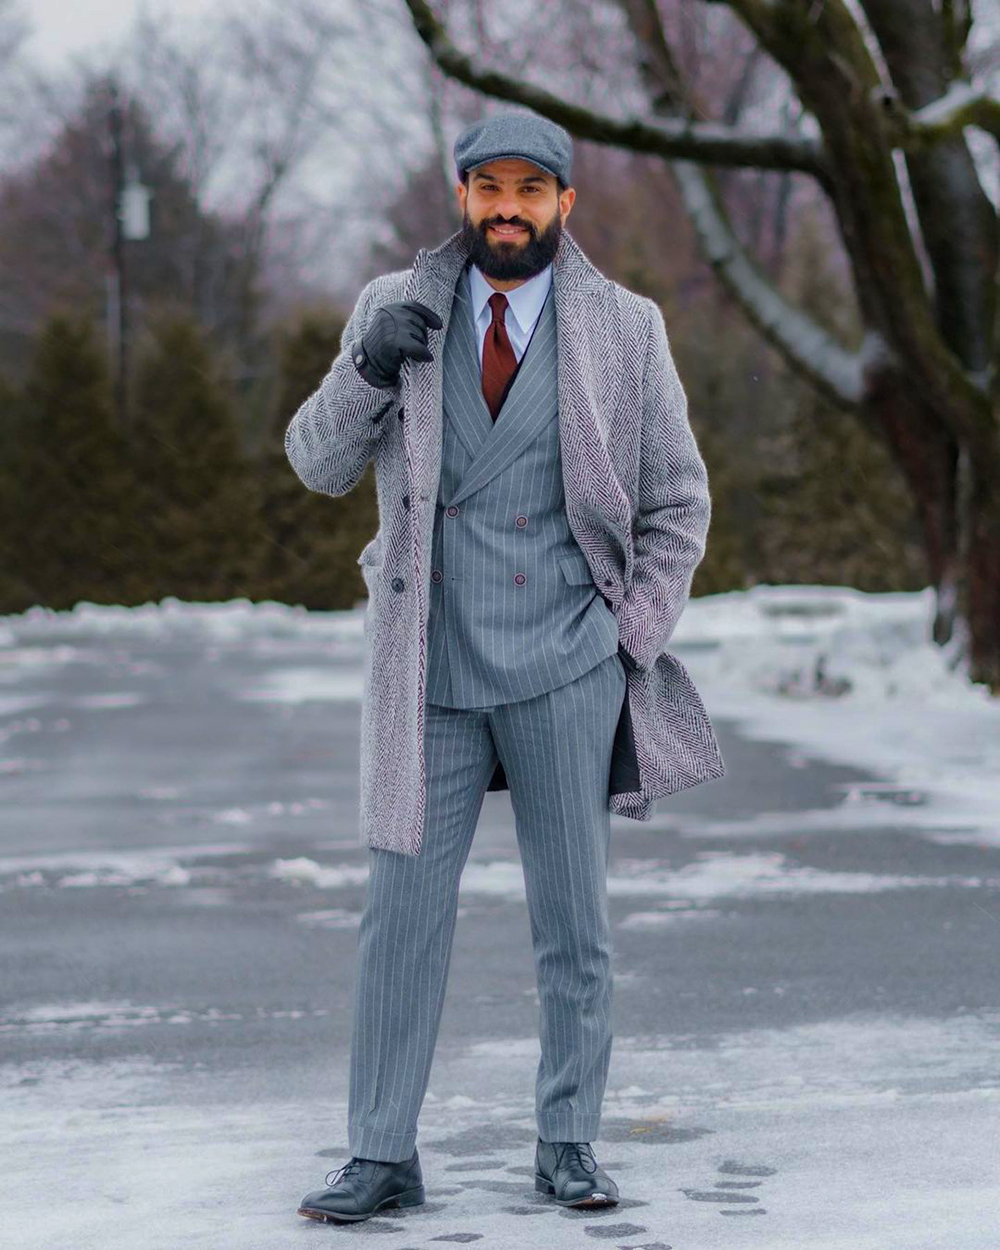 Gray herringbone overcoat, gray vertical striped wool suit, white dress shirt, black oxfords outfit